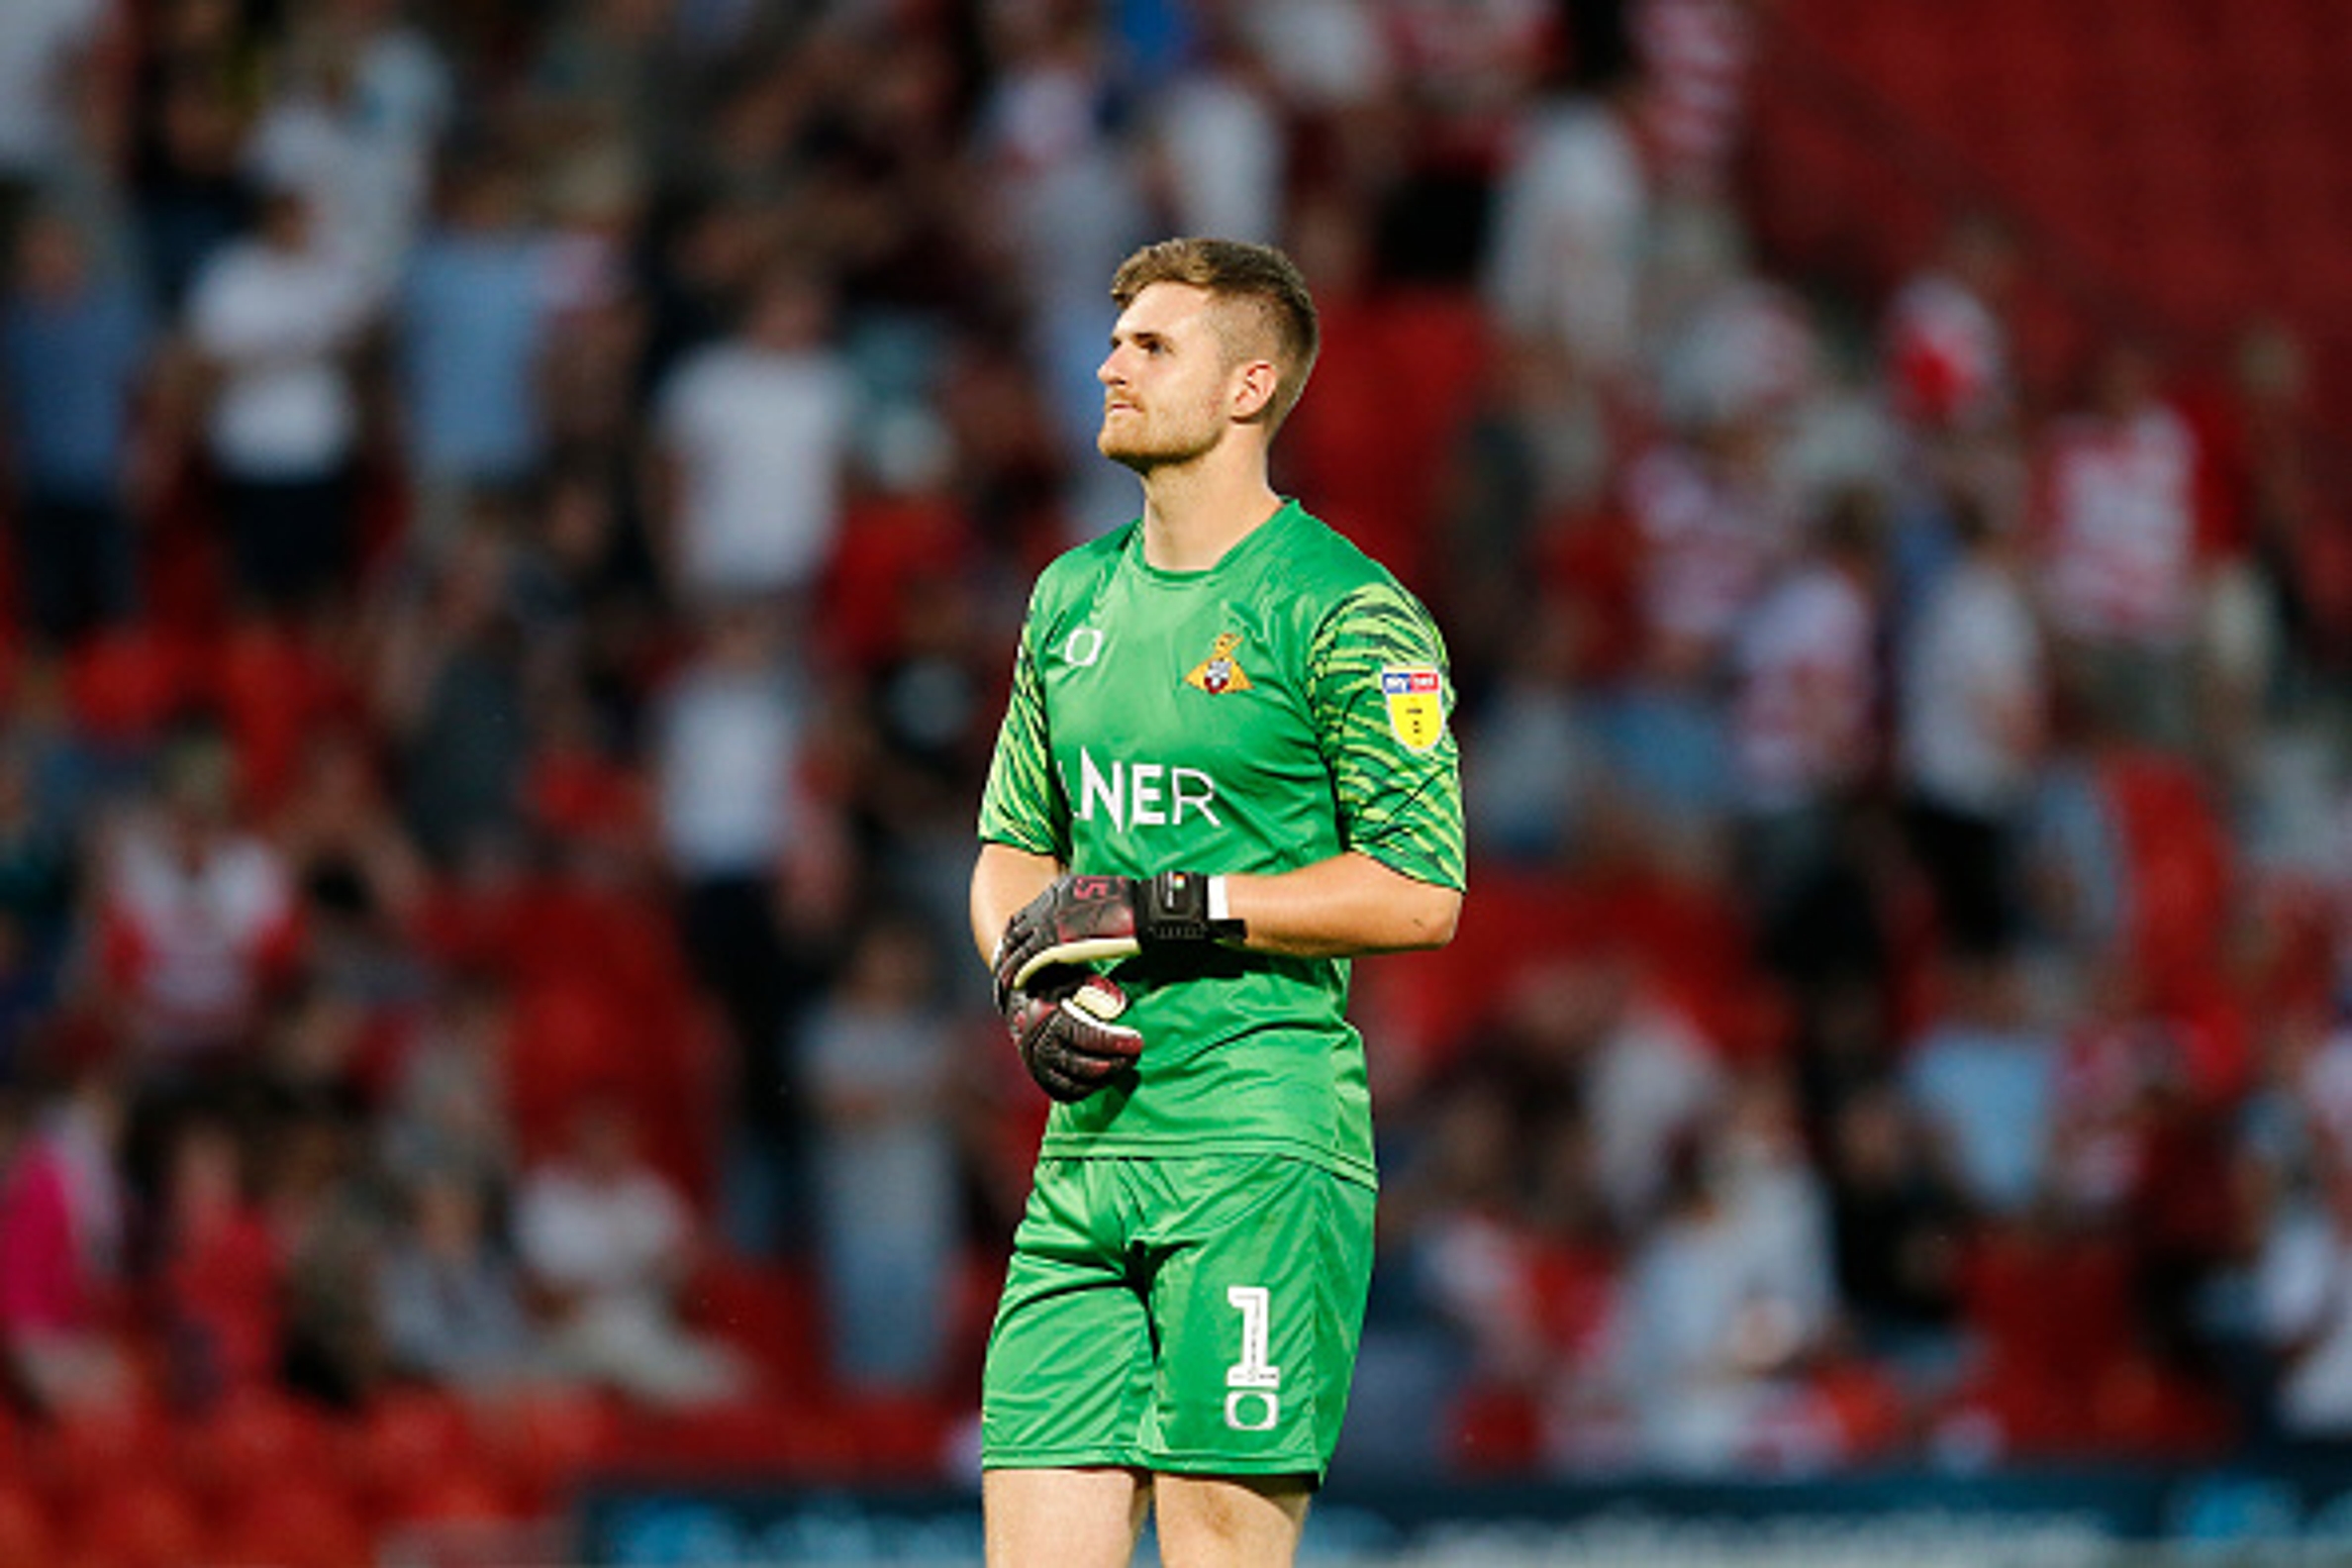 Doncaster Rovers goalkeeper Ian Lawlor in his first spell with the club